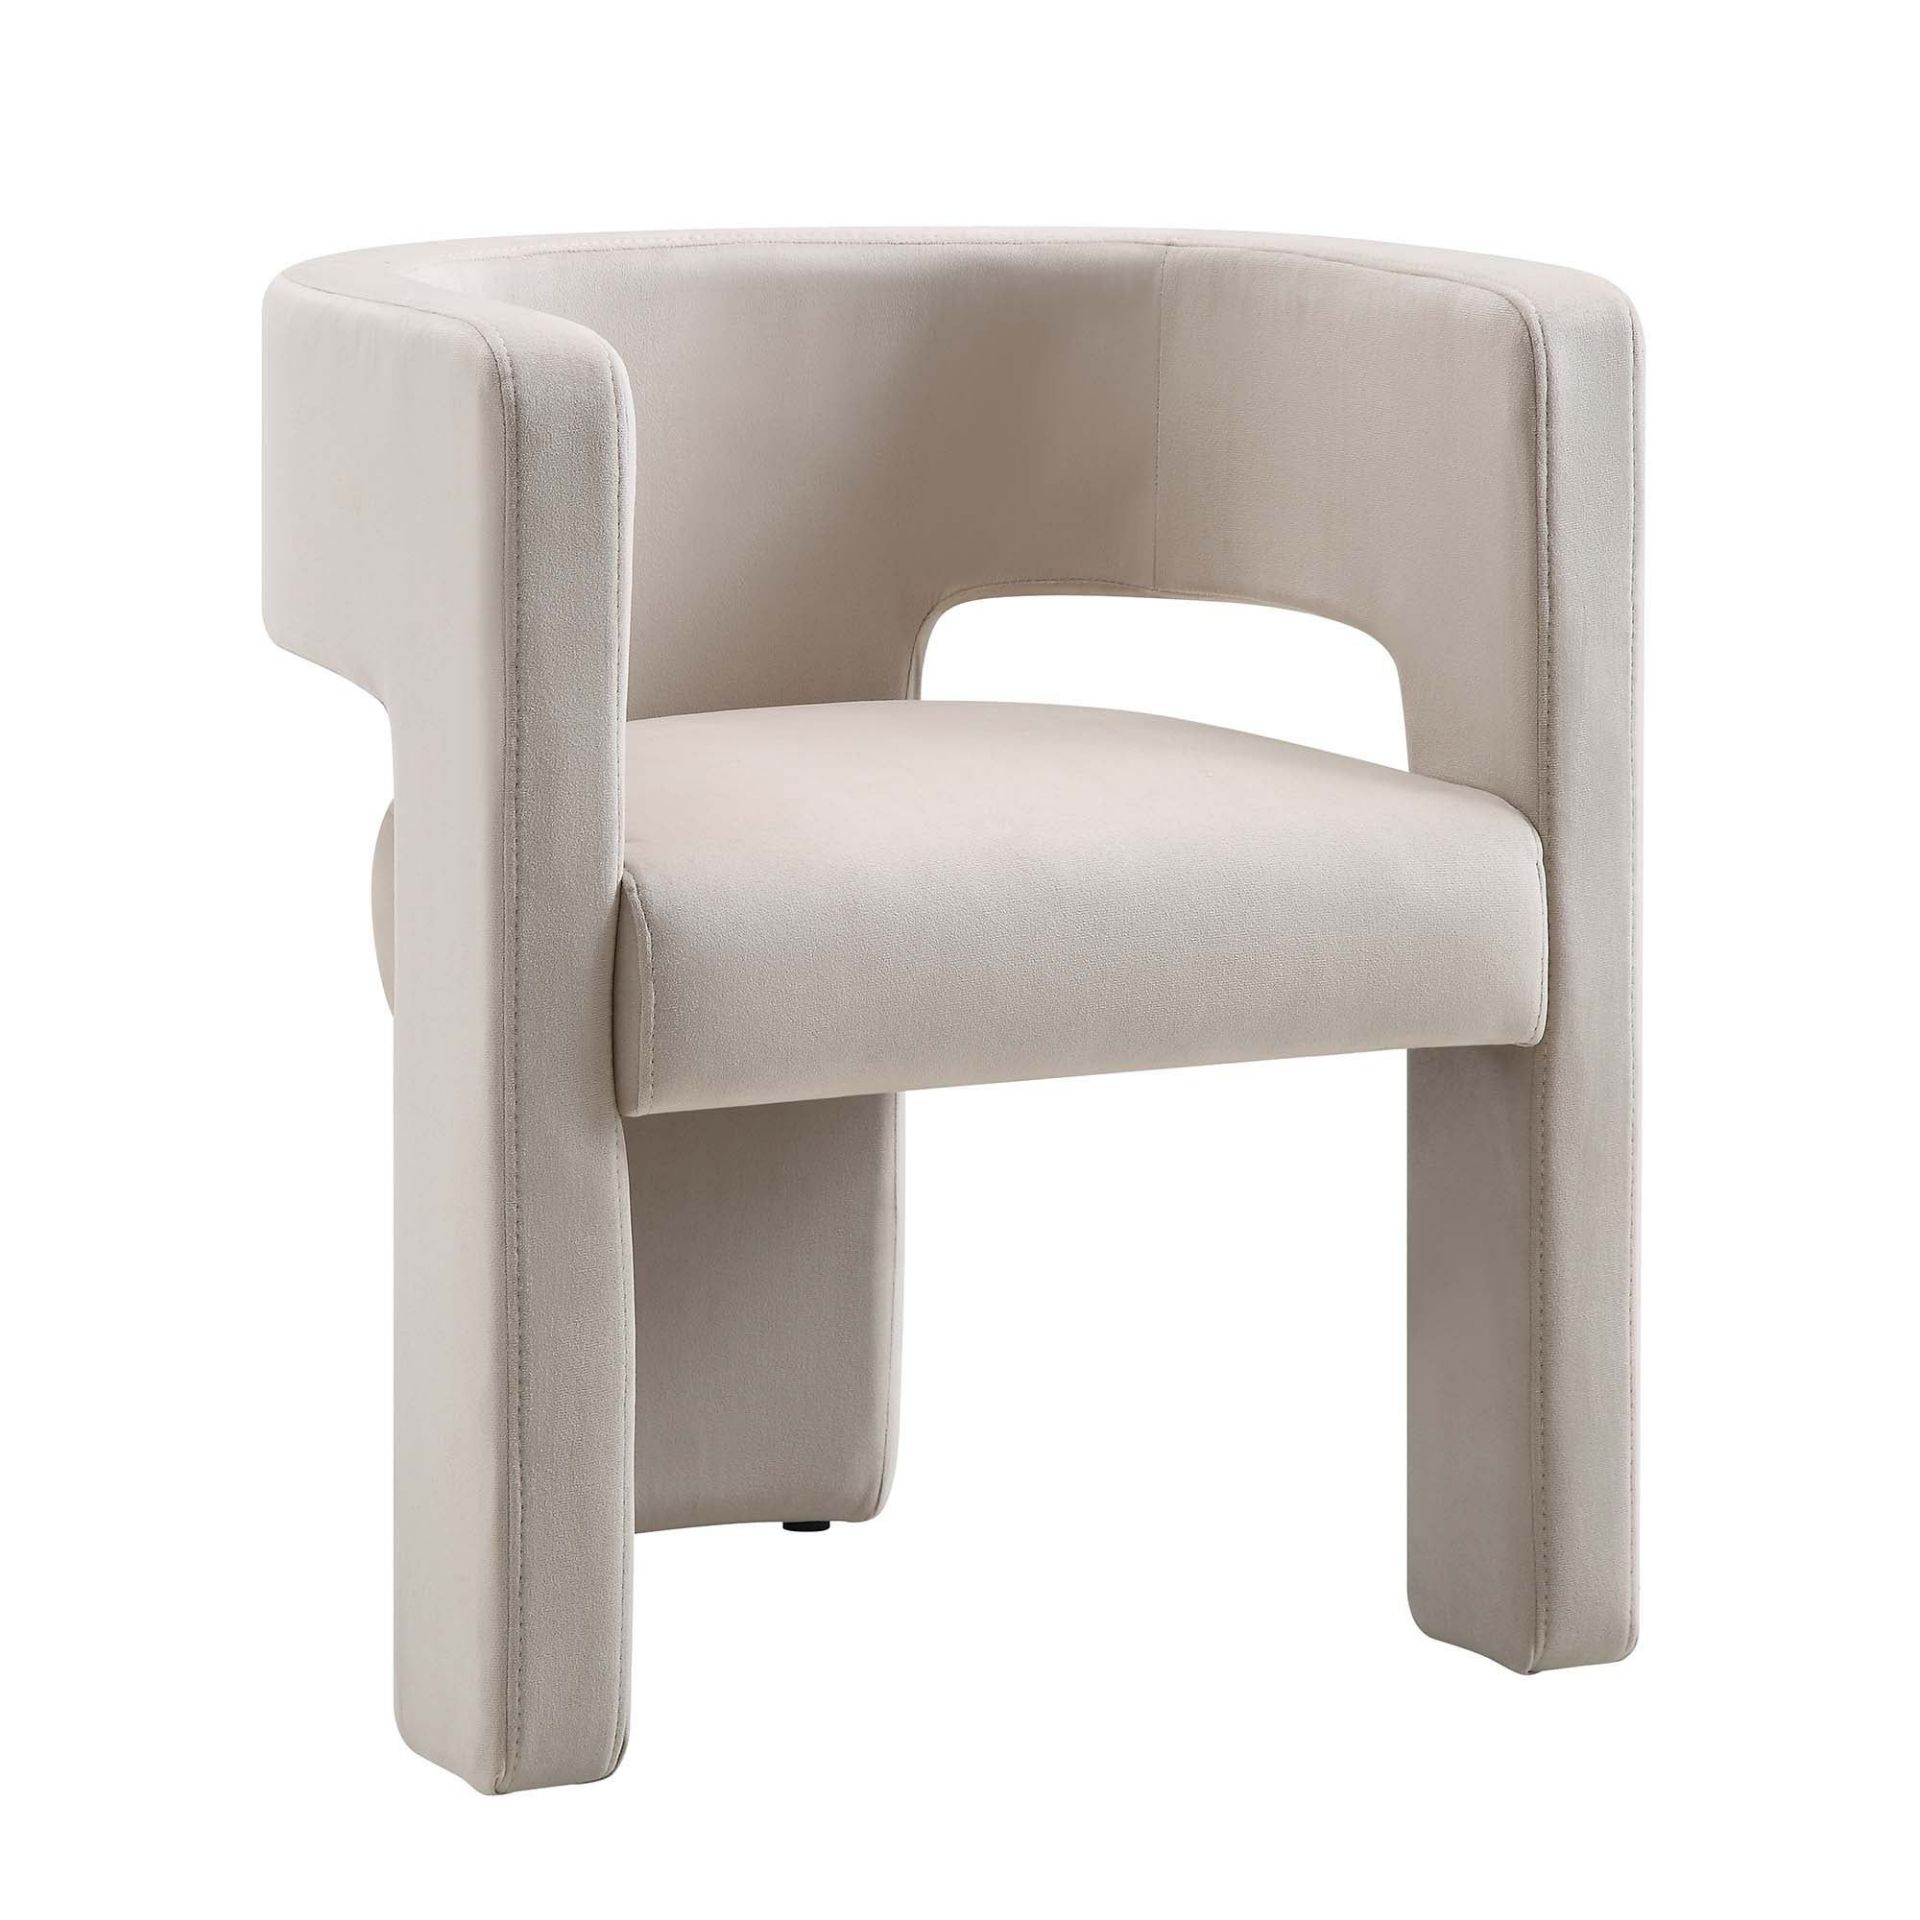 Greenwich Champagne Velvet Dining Chair. - ER29. RRP £229.99. Our beautiful Greenwich chair features - Image 2 of 2